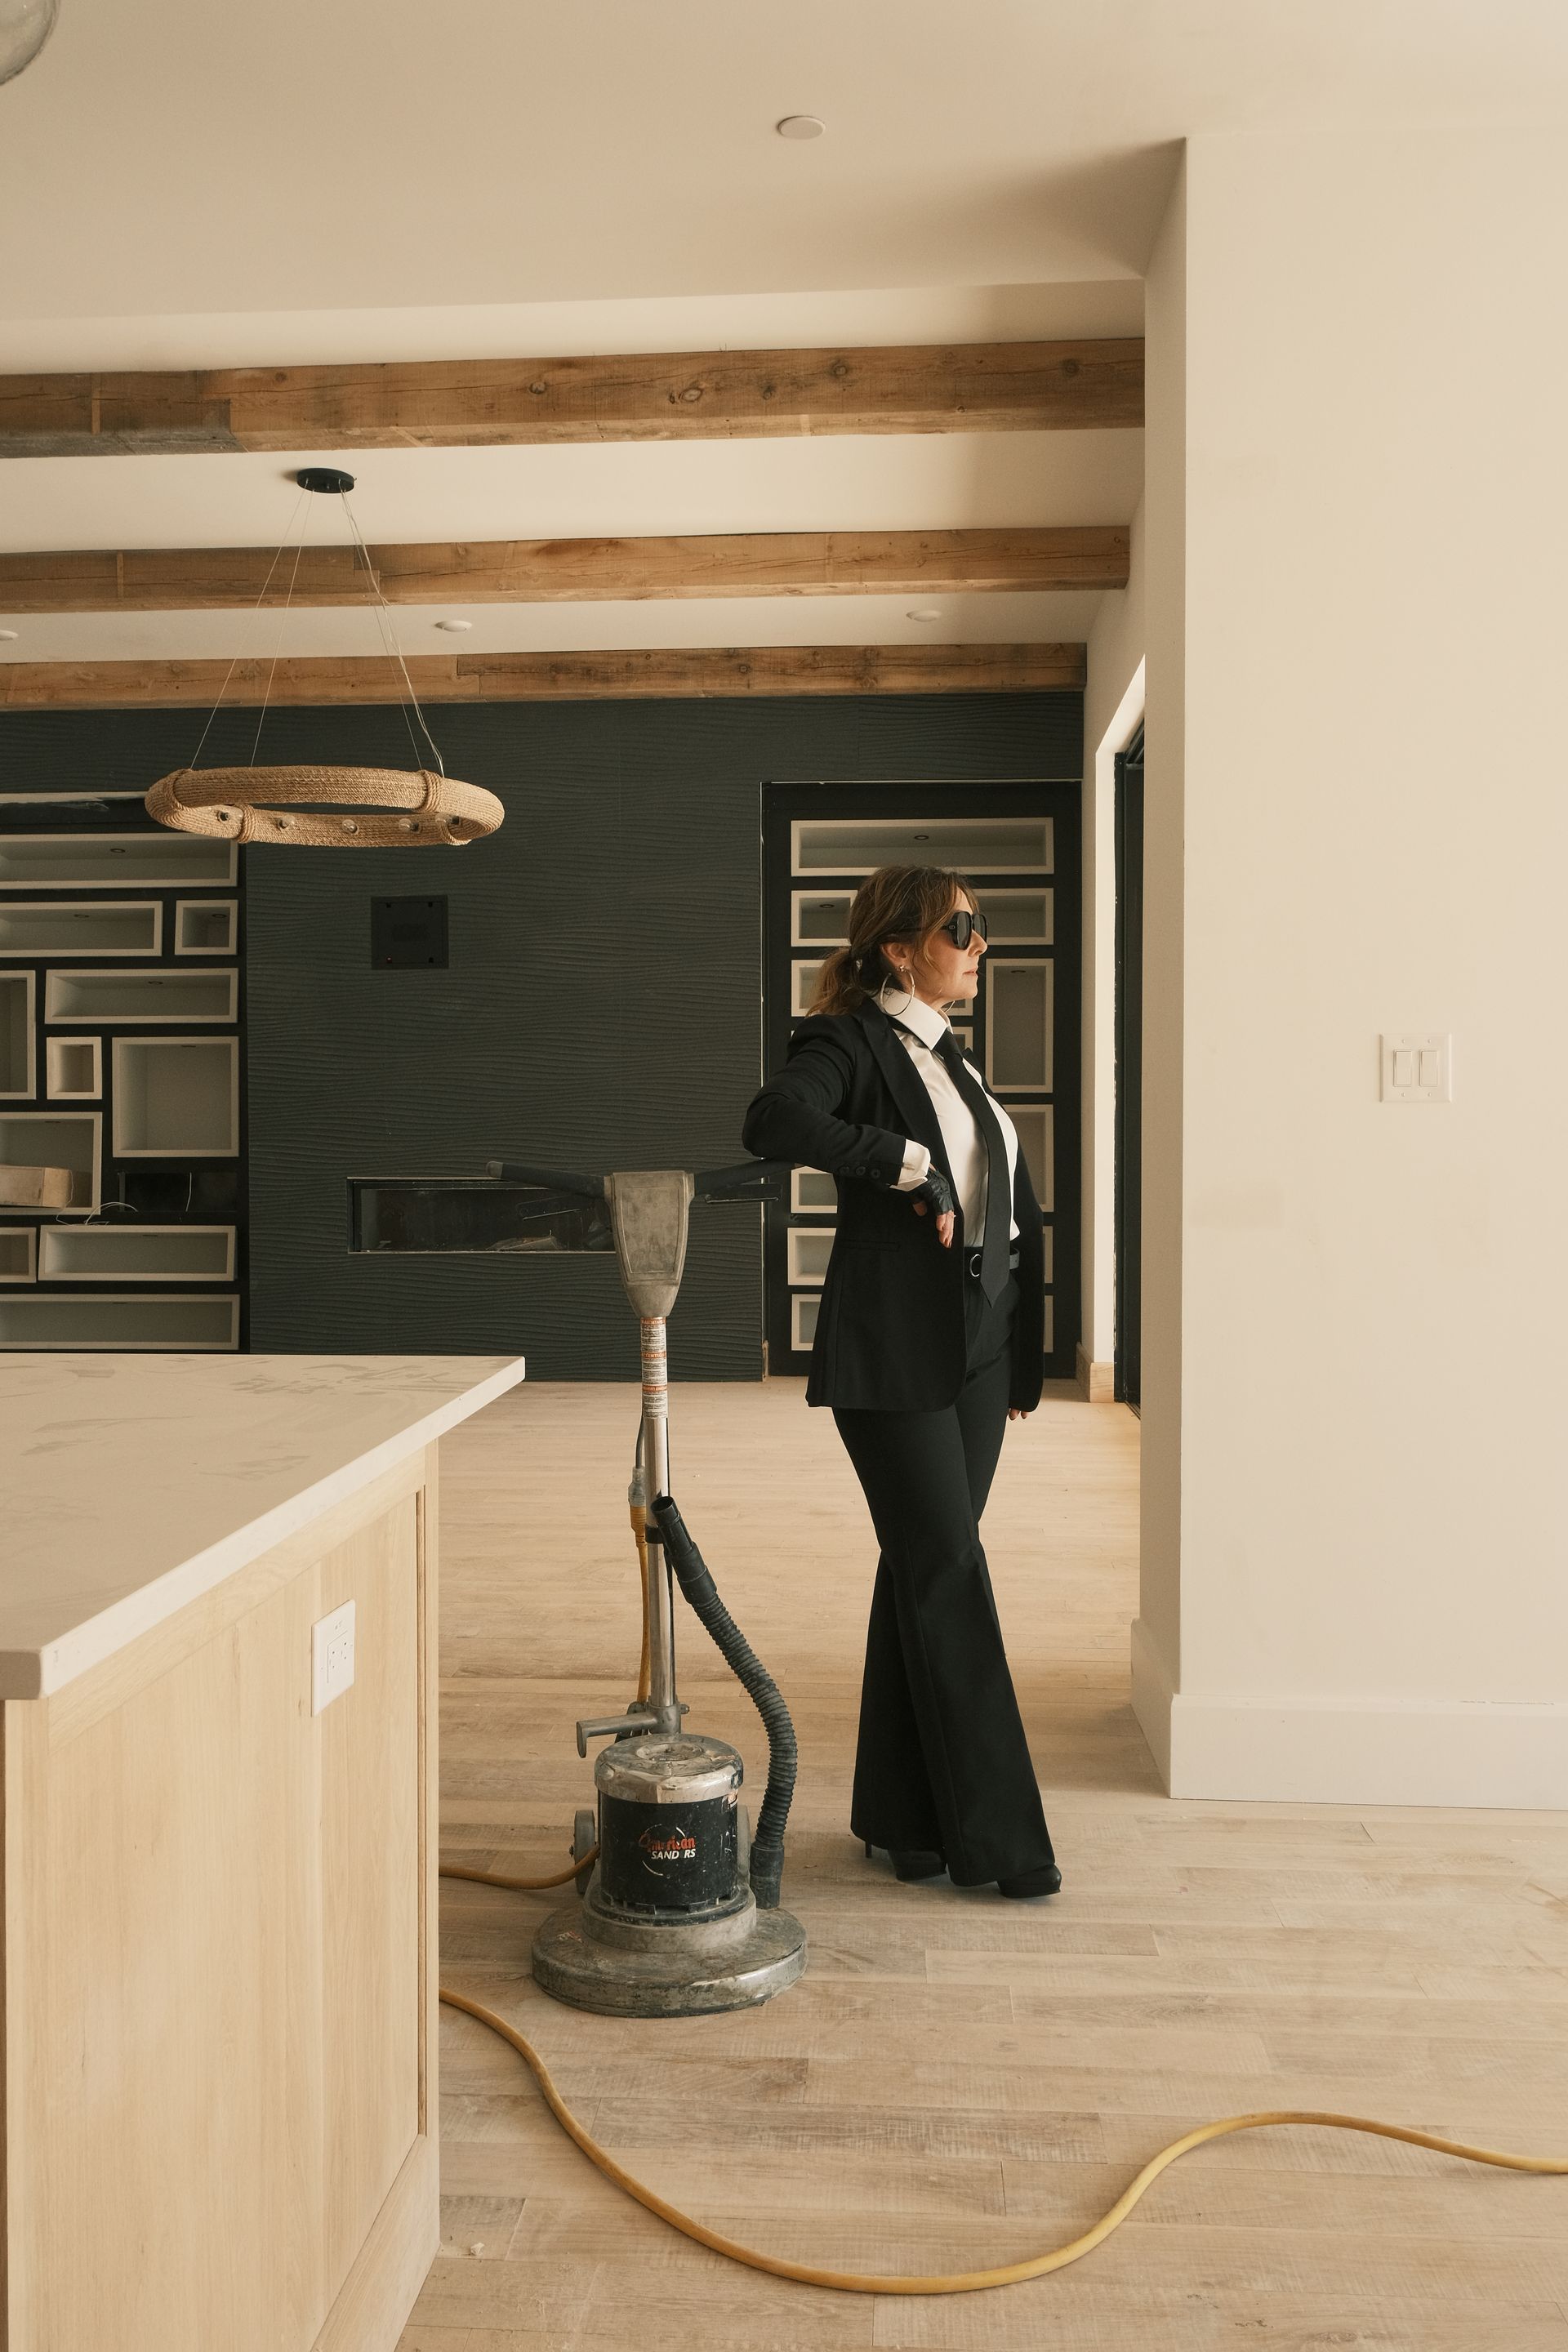 Stephanie Kratz in a suit is standing next to a floor sander in a newly built kitchen/living room.